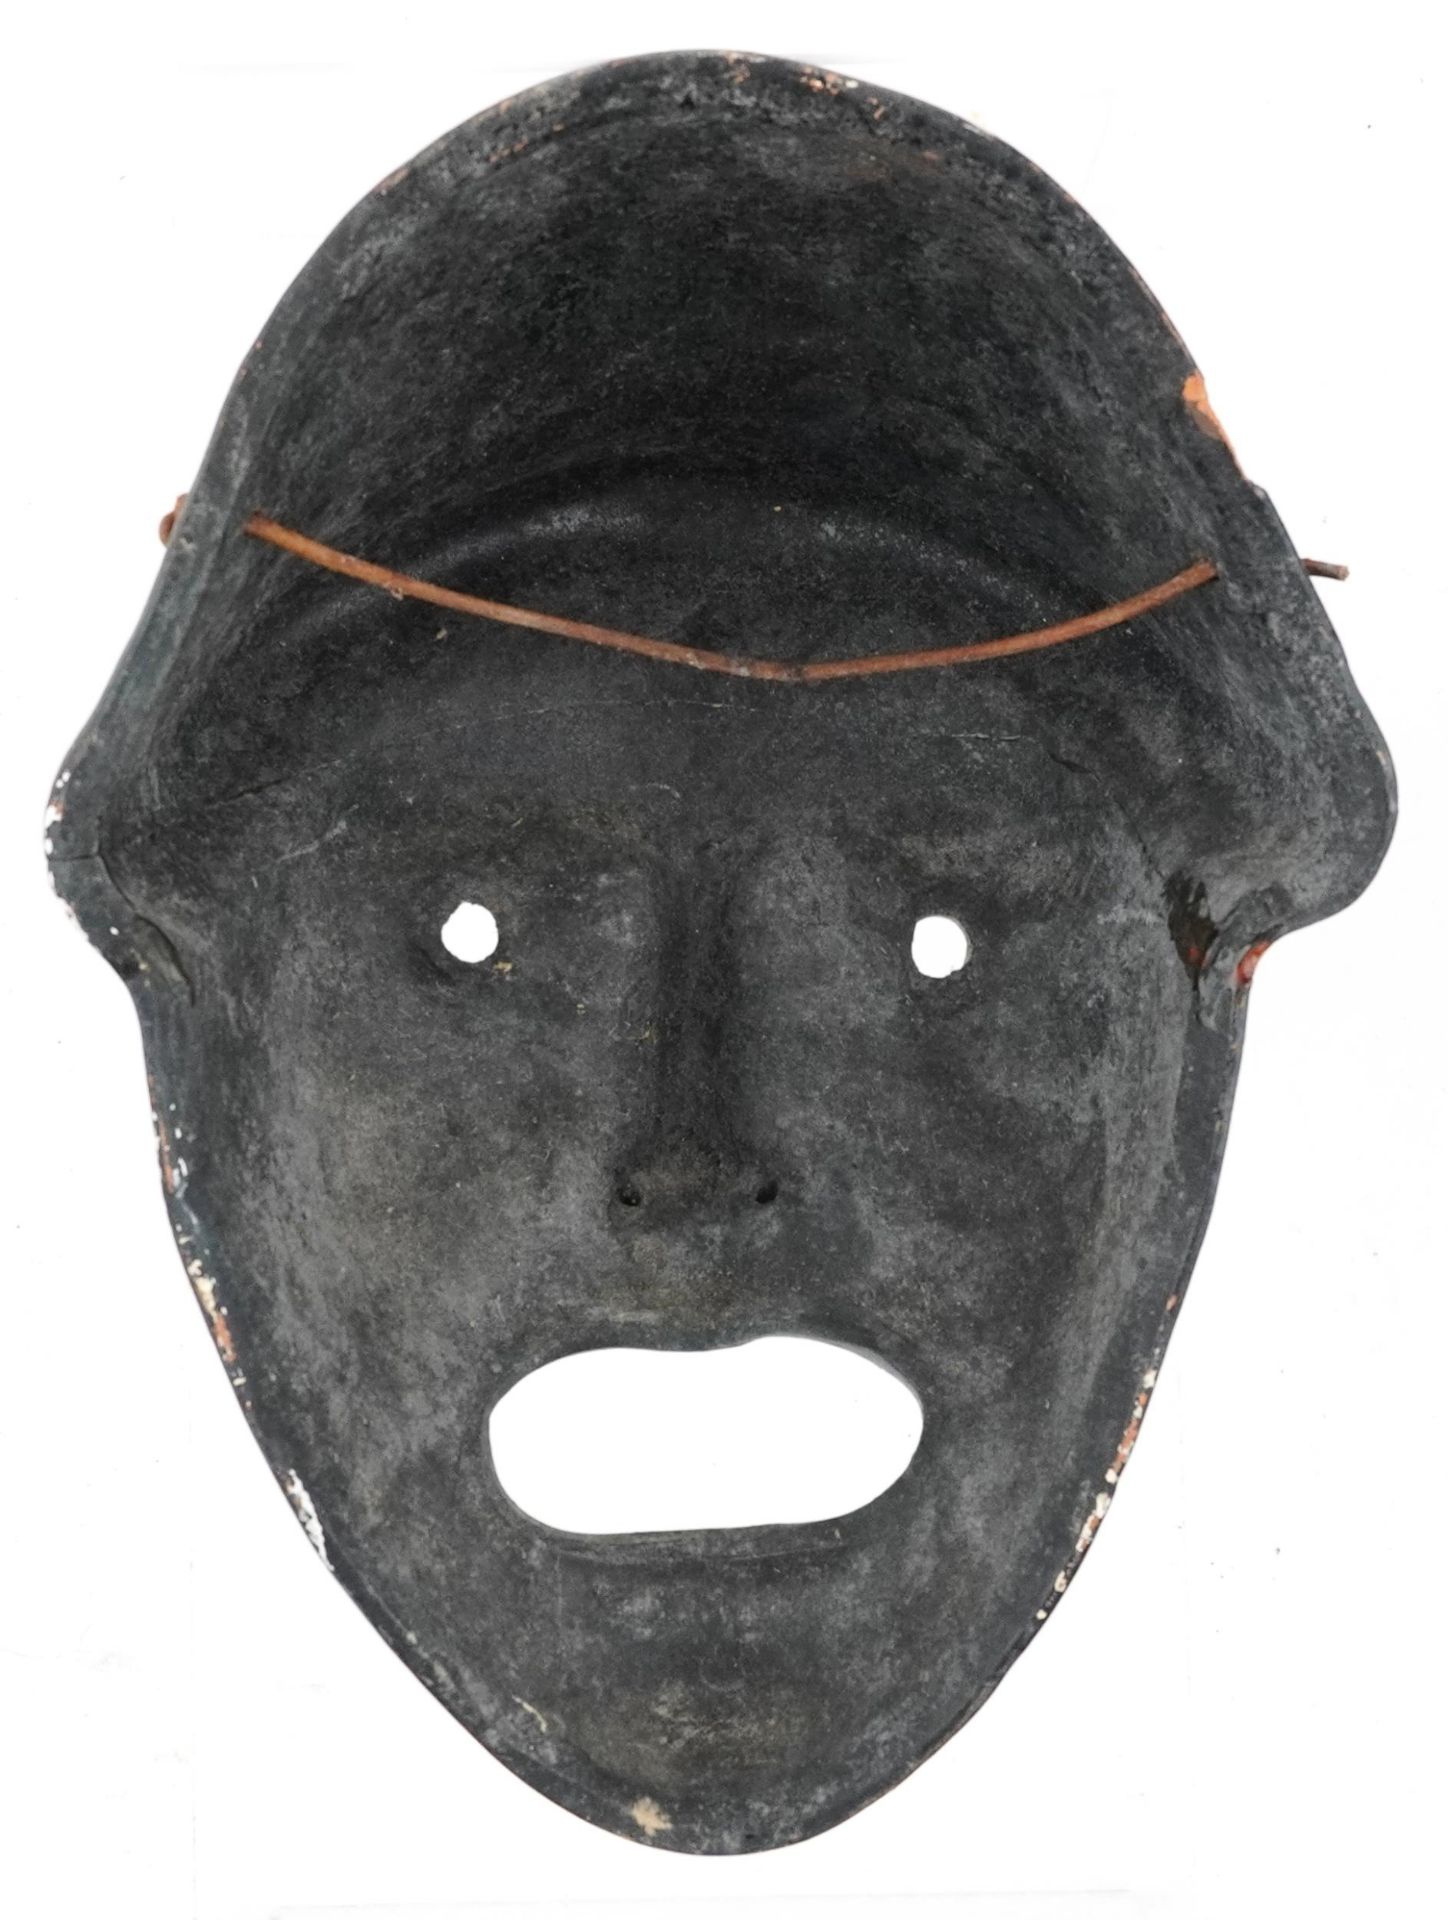 Greek verdigris style terracotta theatrical tragedy wall mask, 24cm high - Image 2 of 2